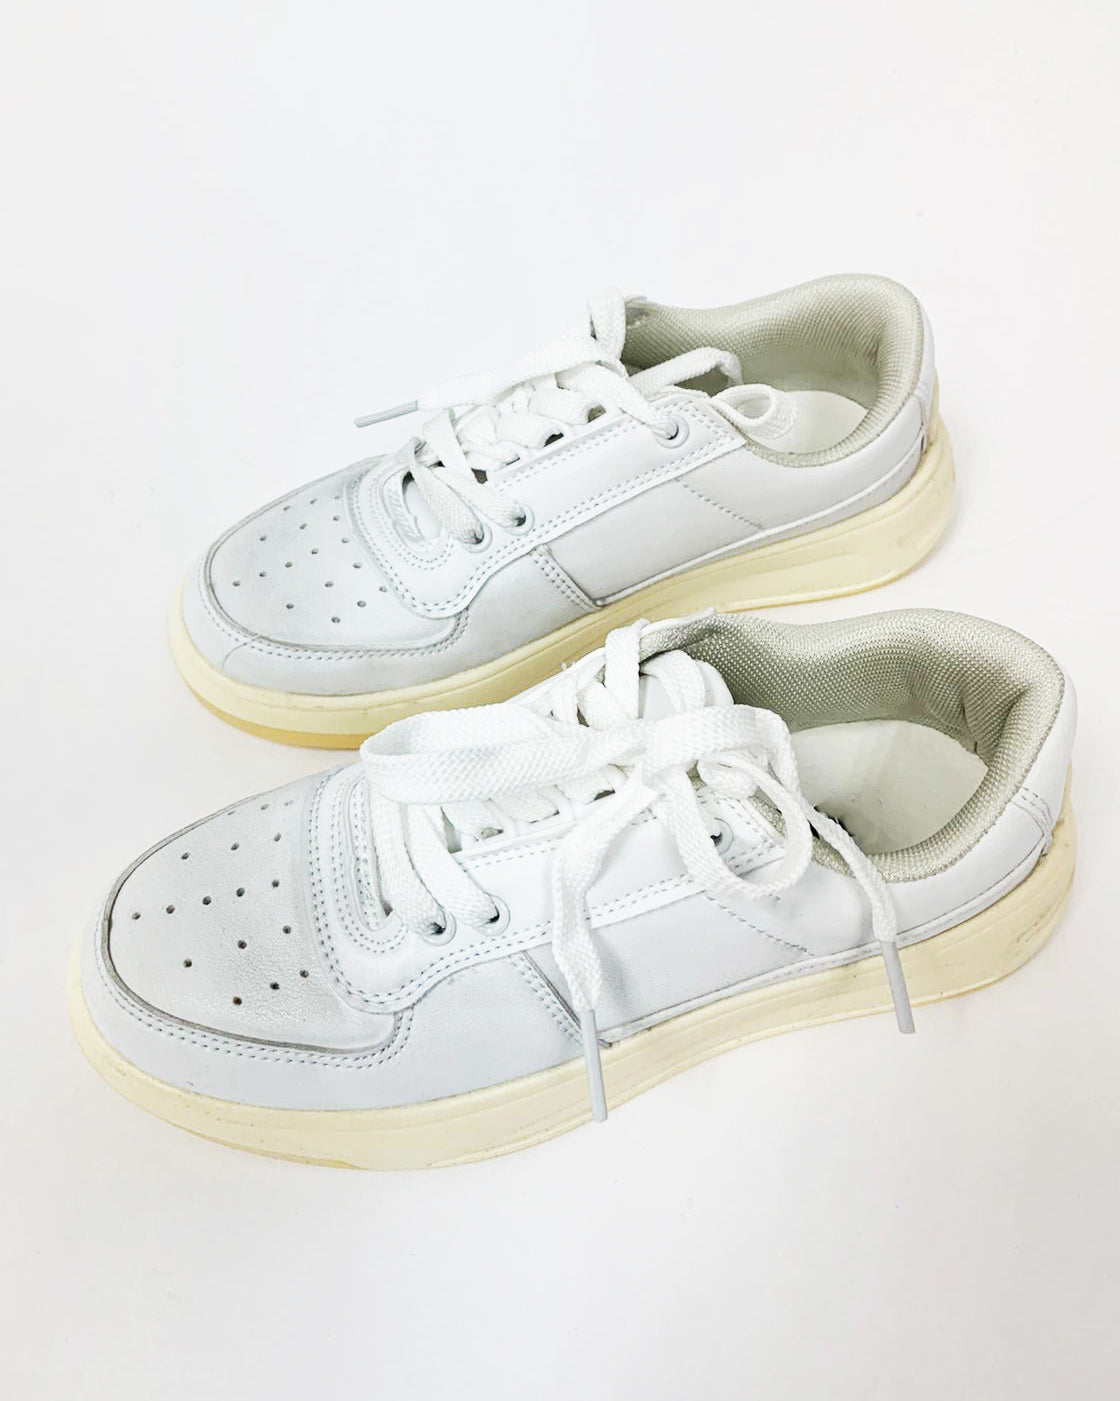 iovry PU leather distressed sneakers *pre-order*